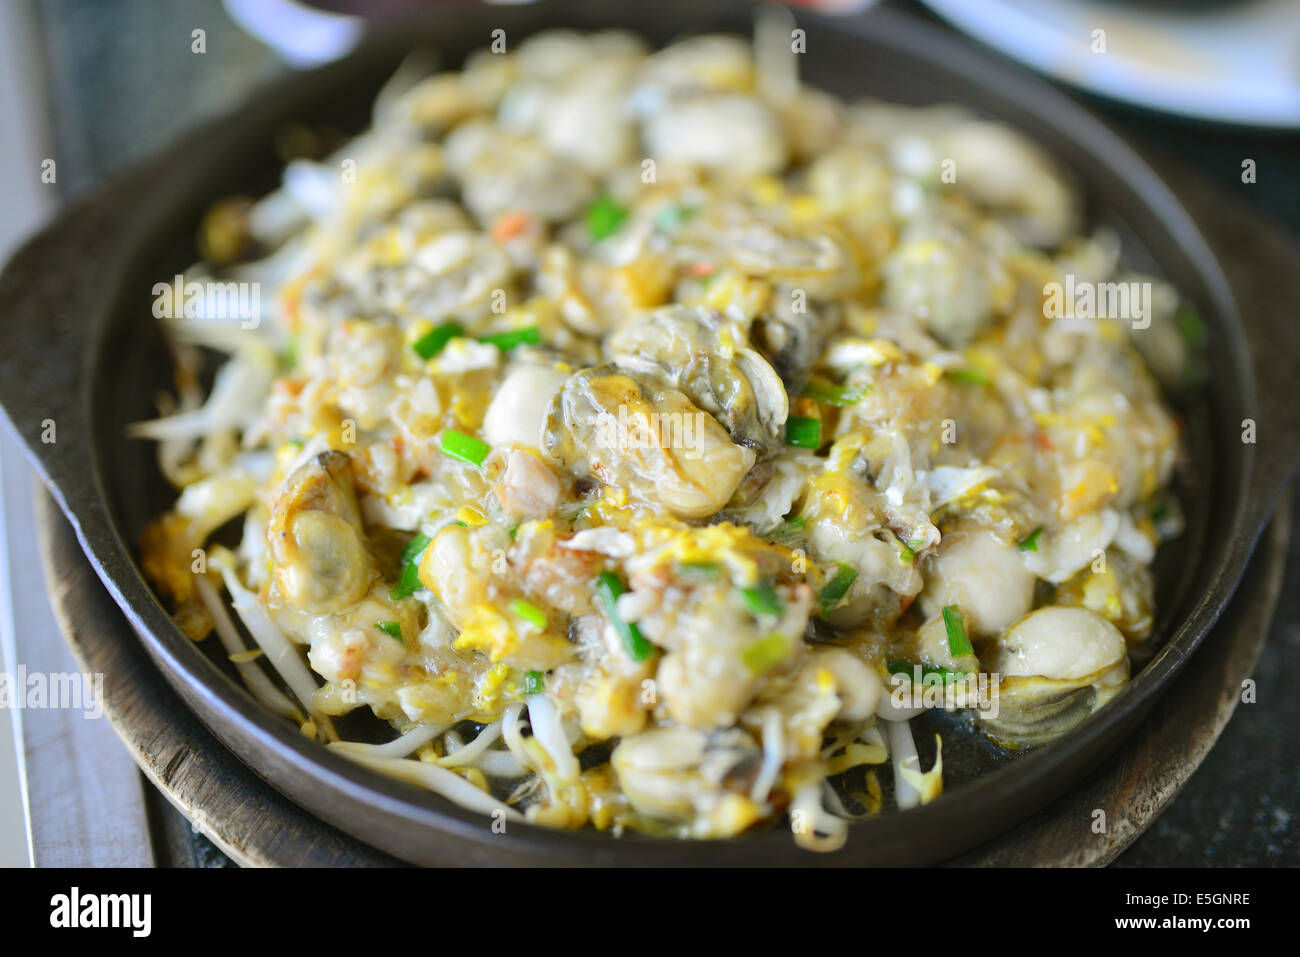 Fried Oyster With Bean Sprout Stock Photo